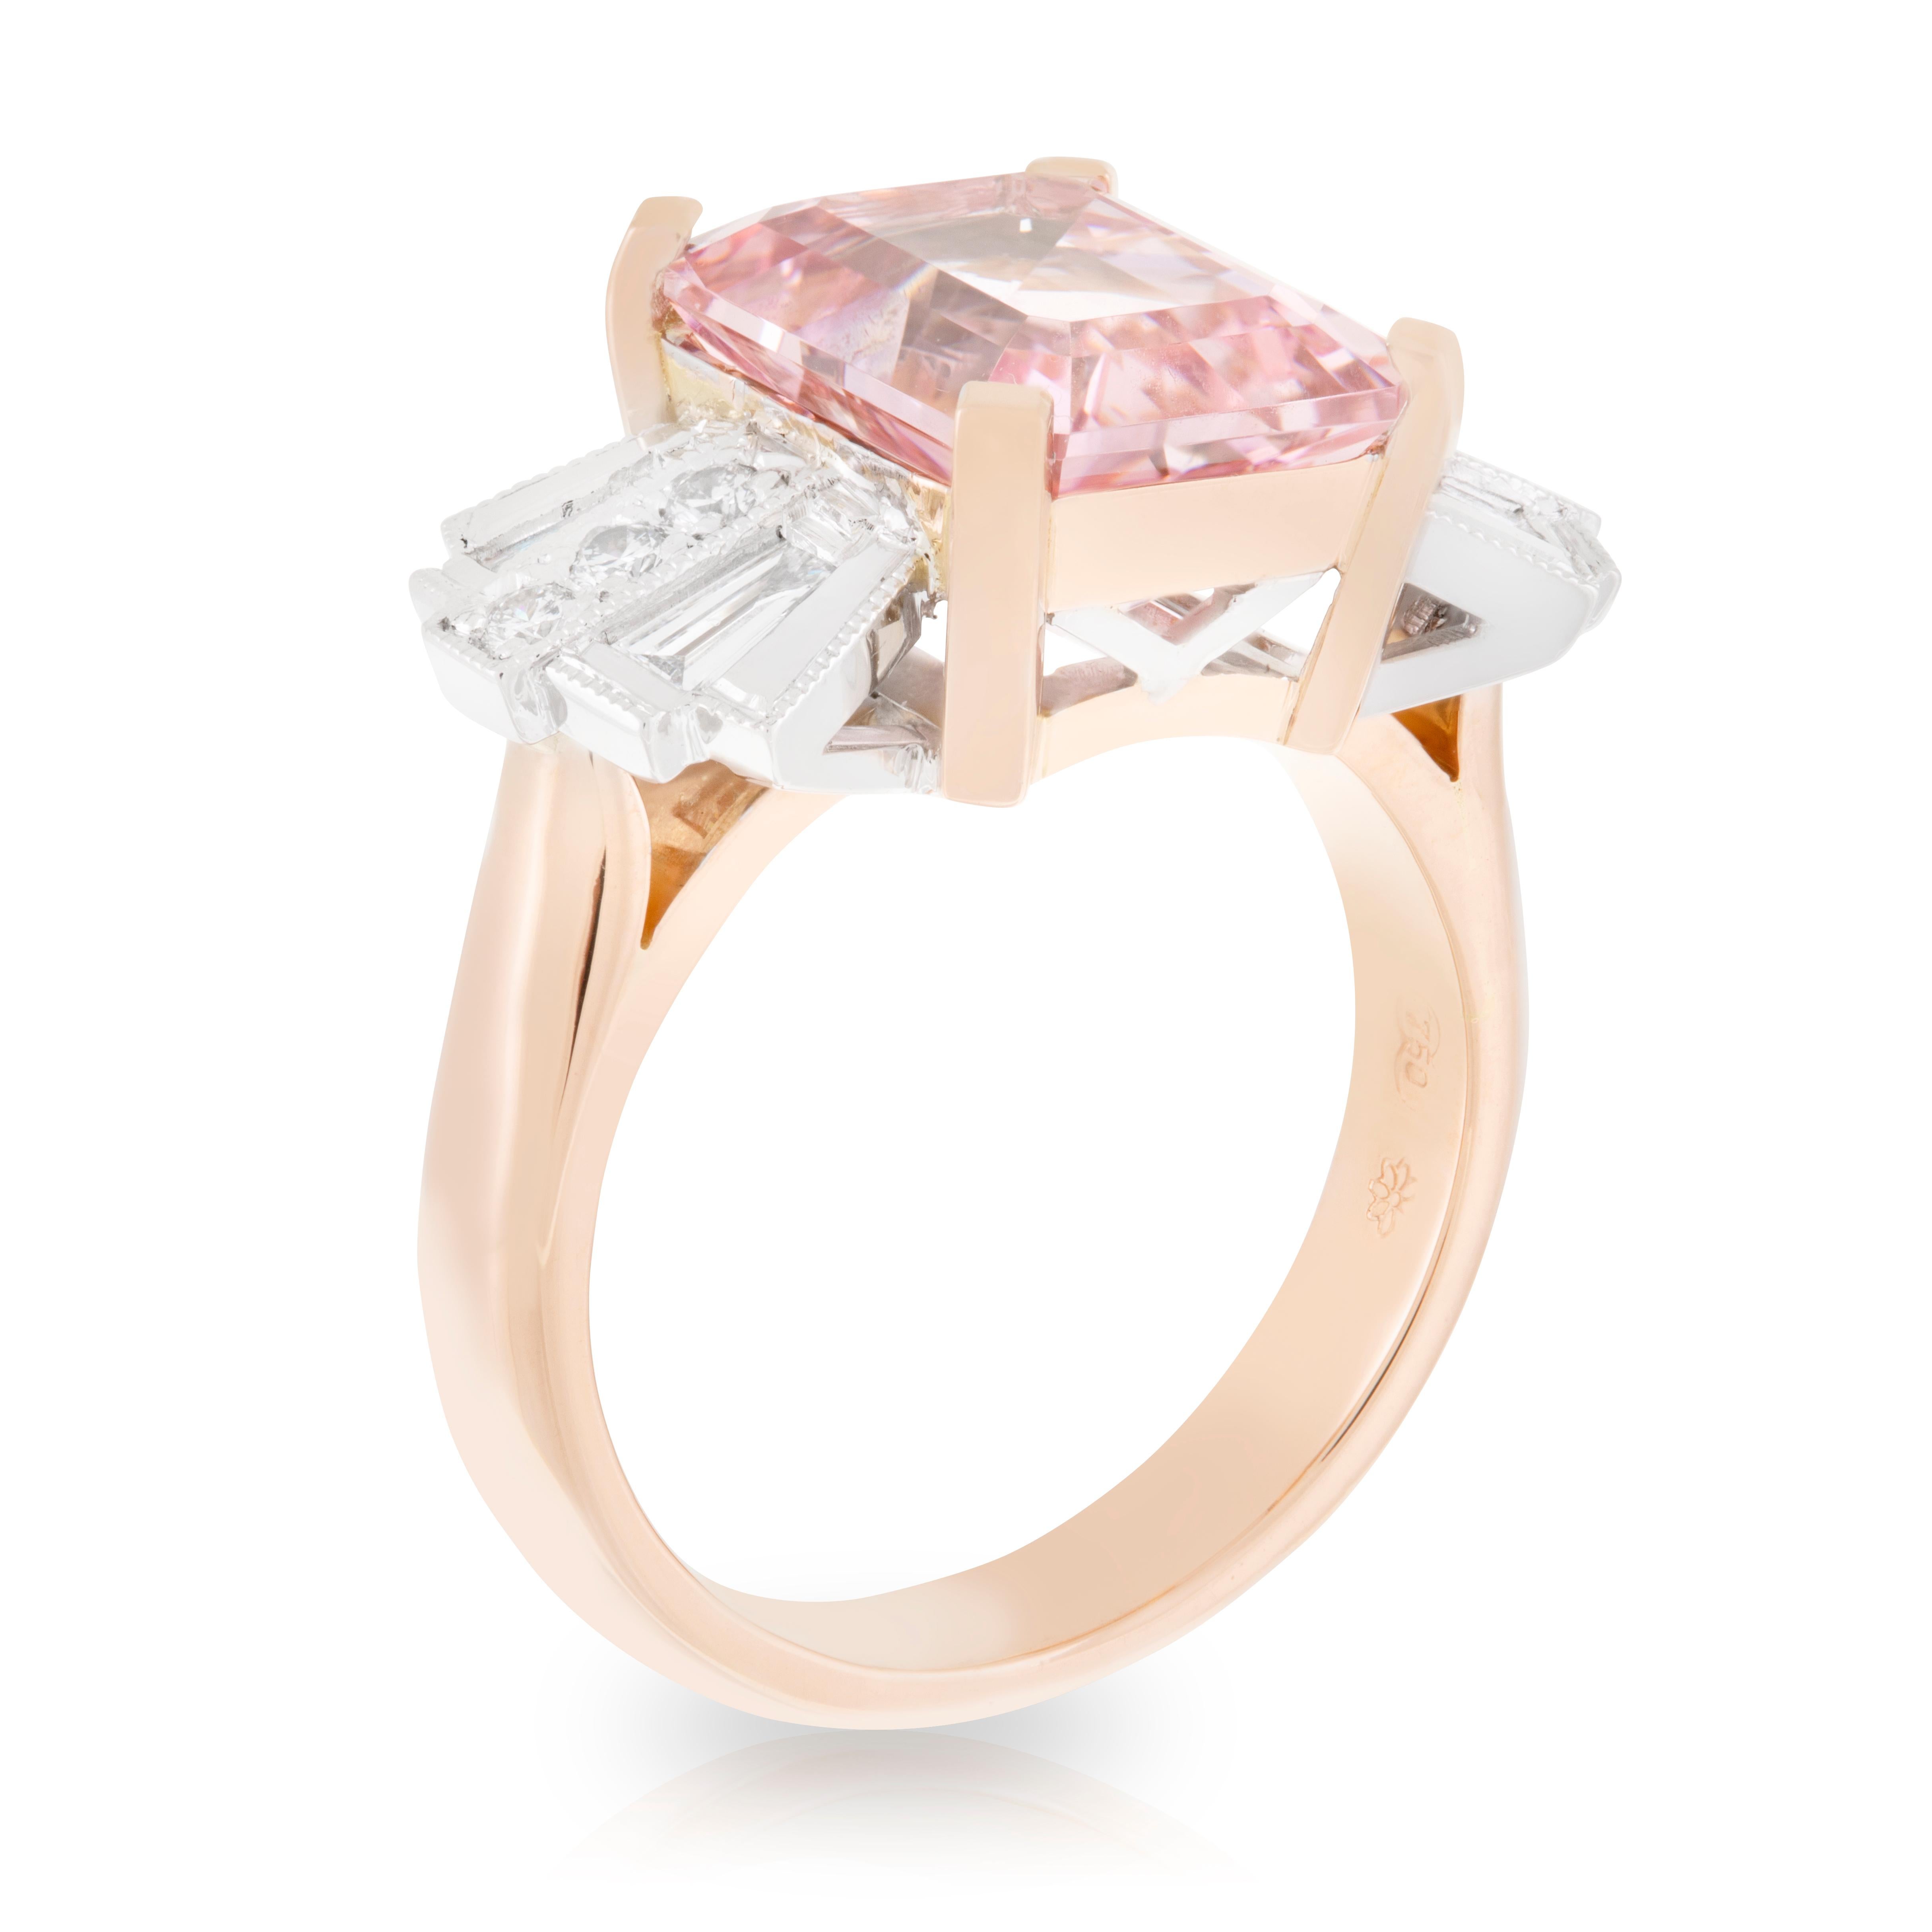 Handmade 18ct Rose and White Gold 5.05ct Emerald cut Morganite and Art Deco Diamond Bow style Ring. TDW 0.38ct
